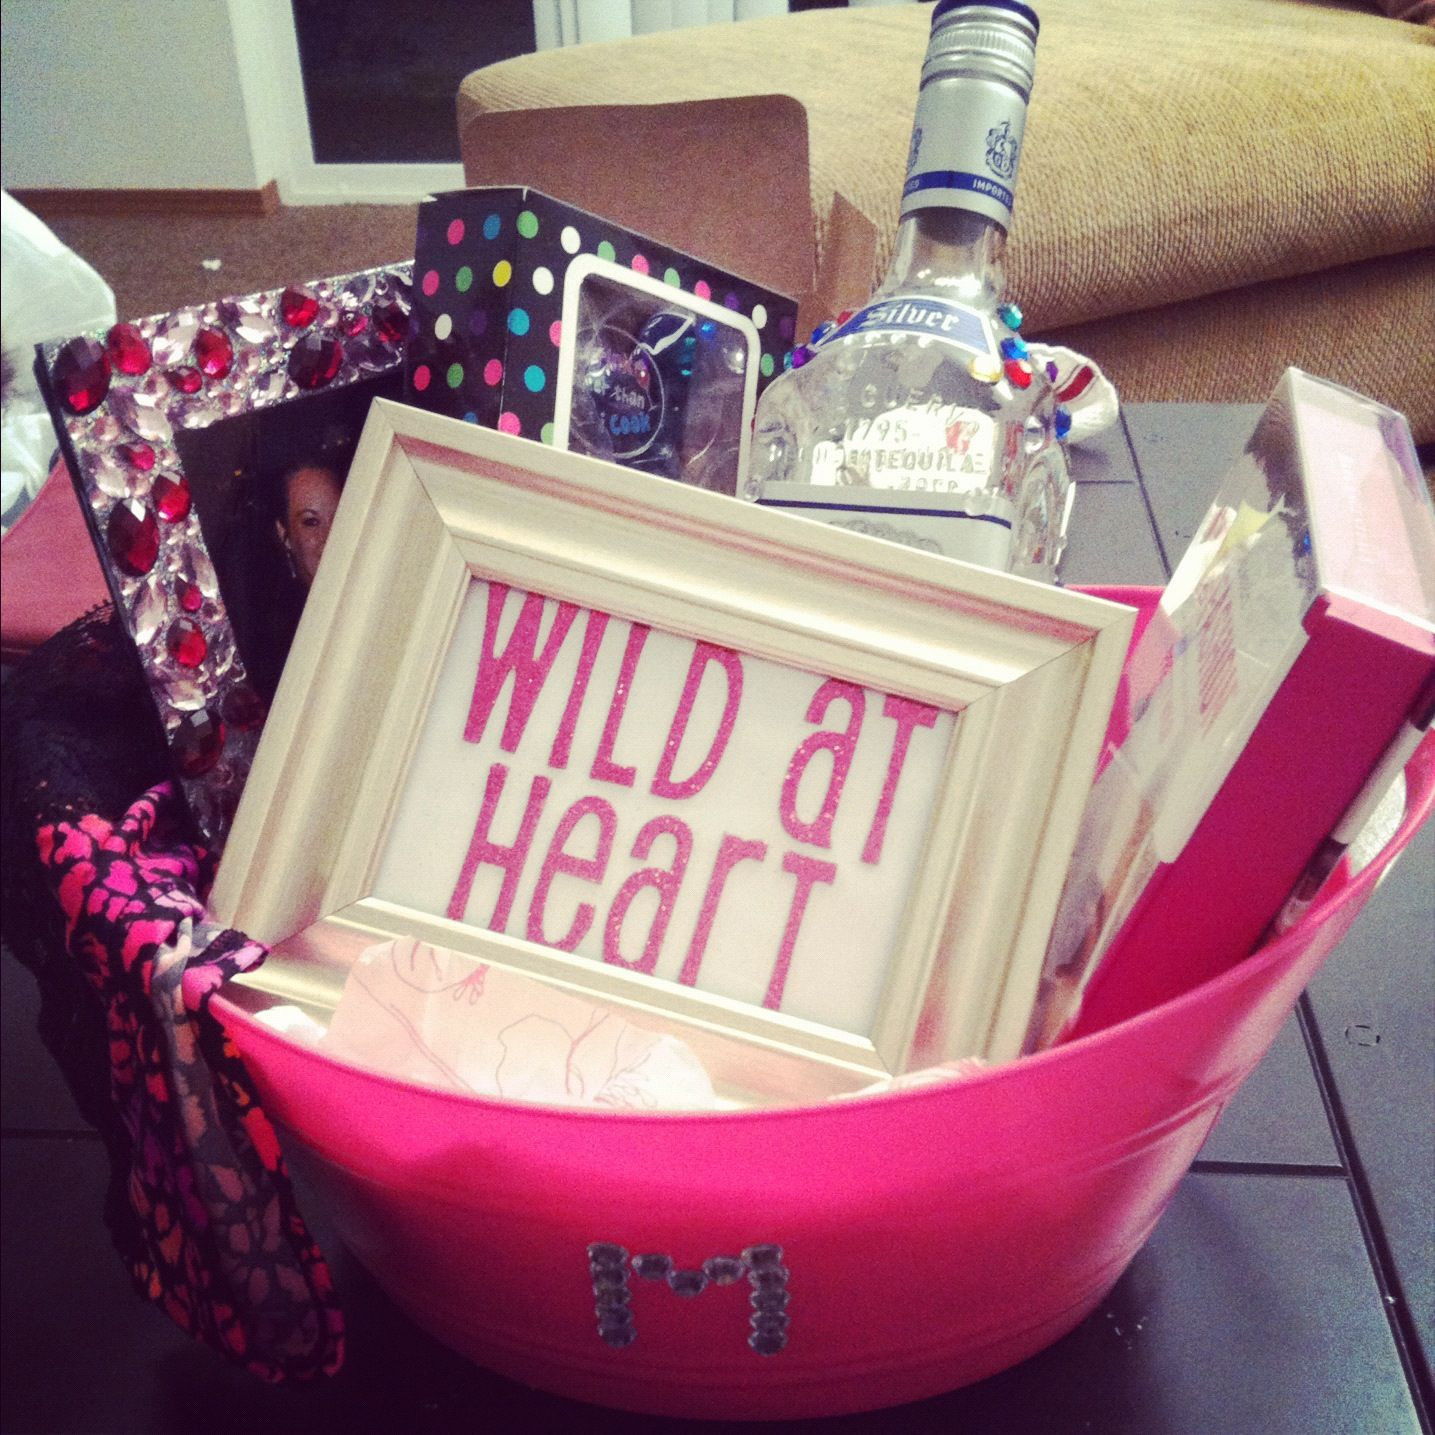 22Nd Anniversary Gift Ideas For Her
 I m so excited to finally blog about a t basket that I